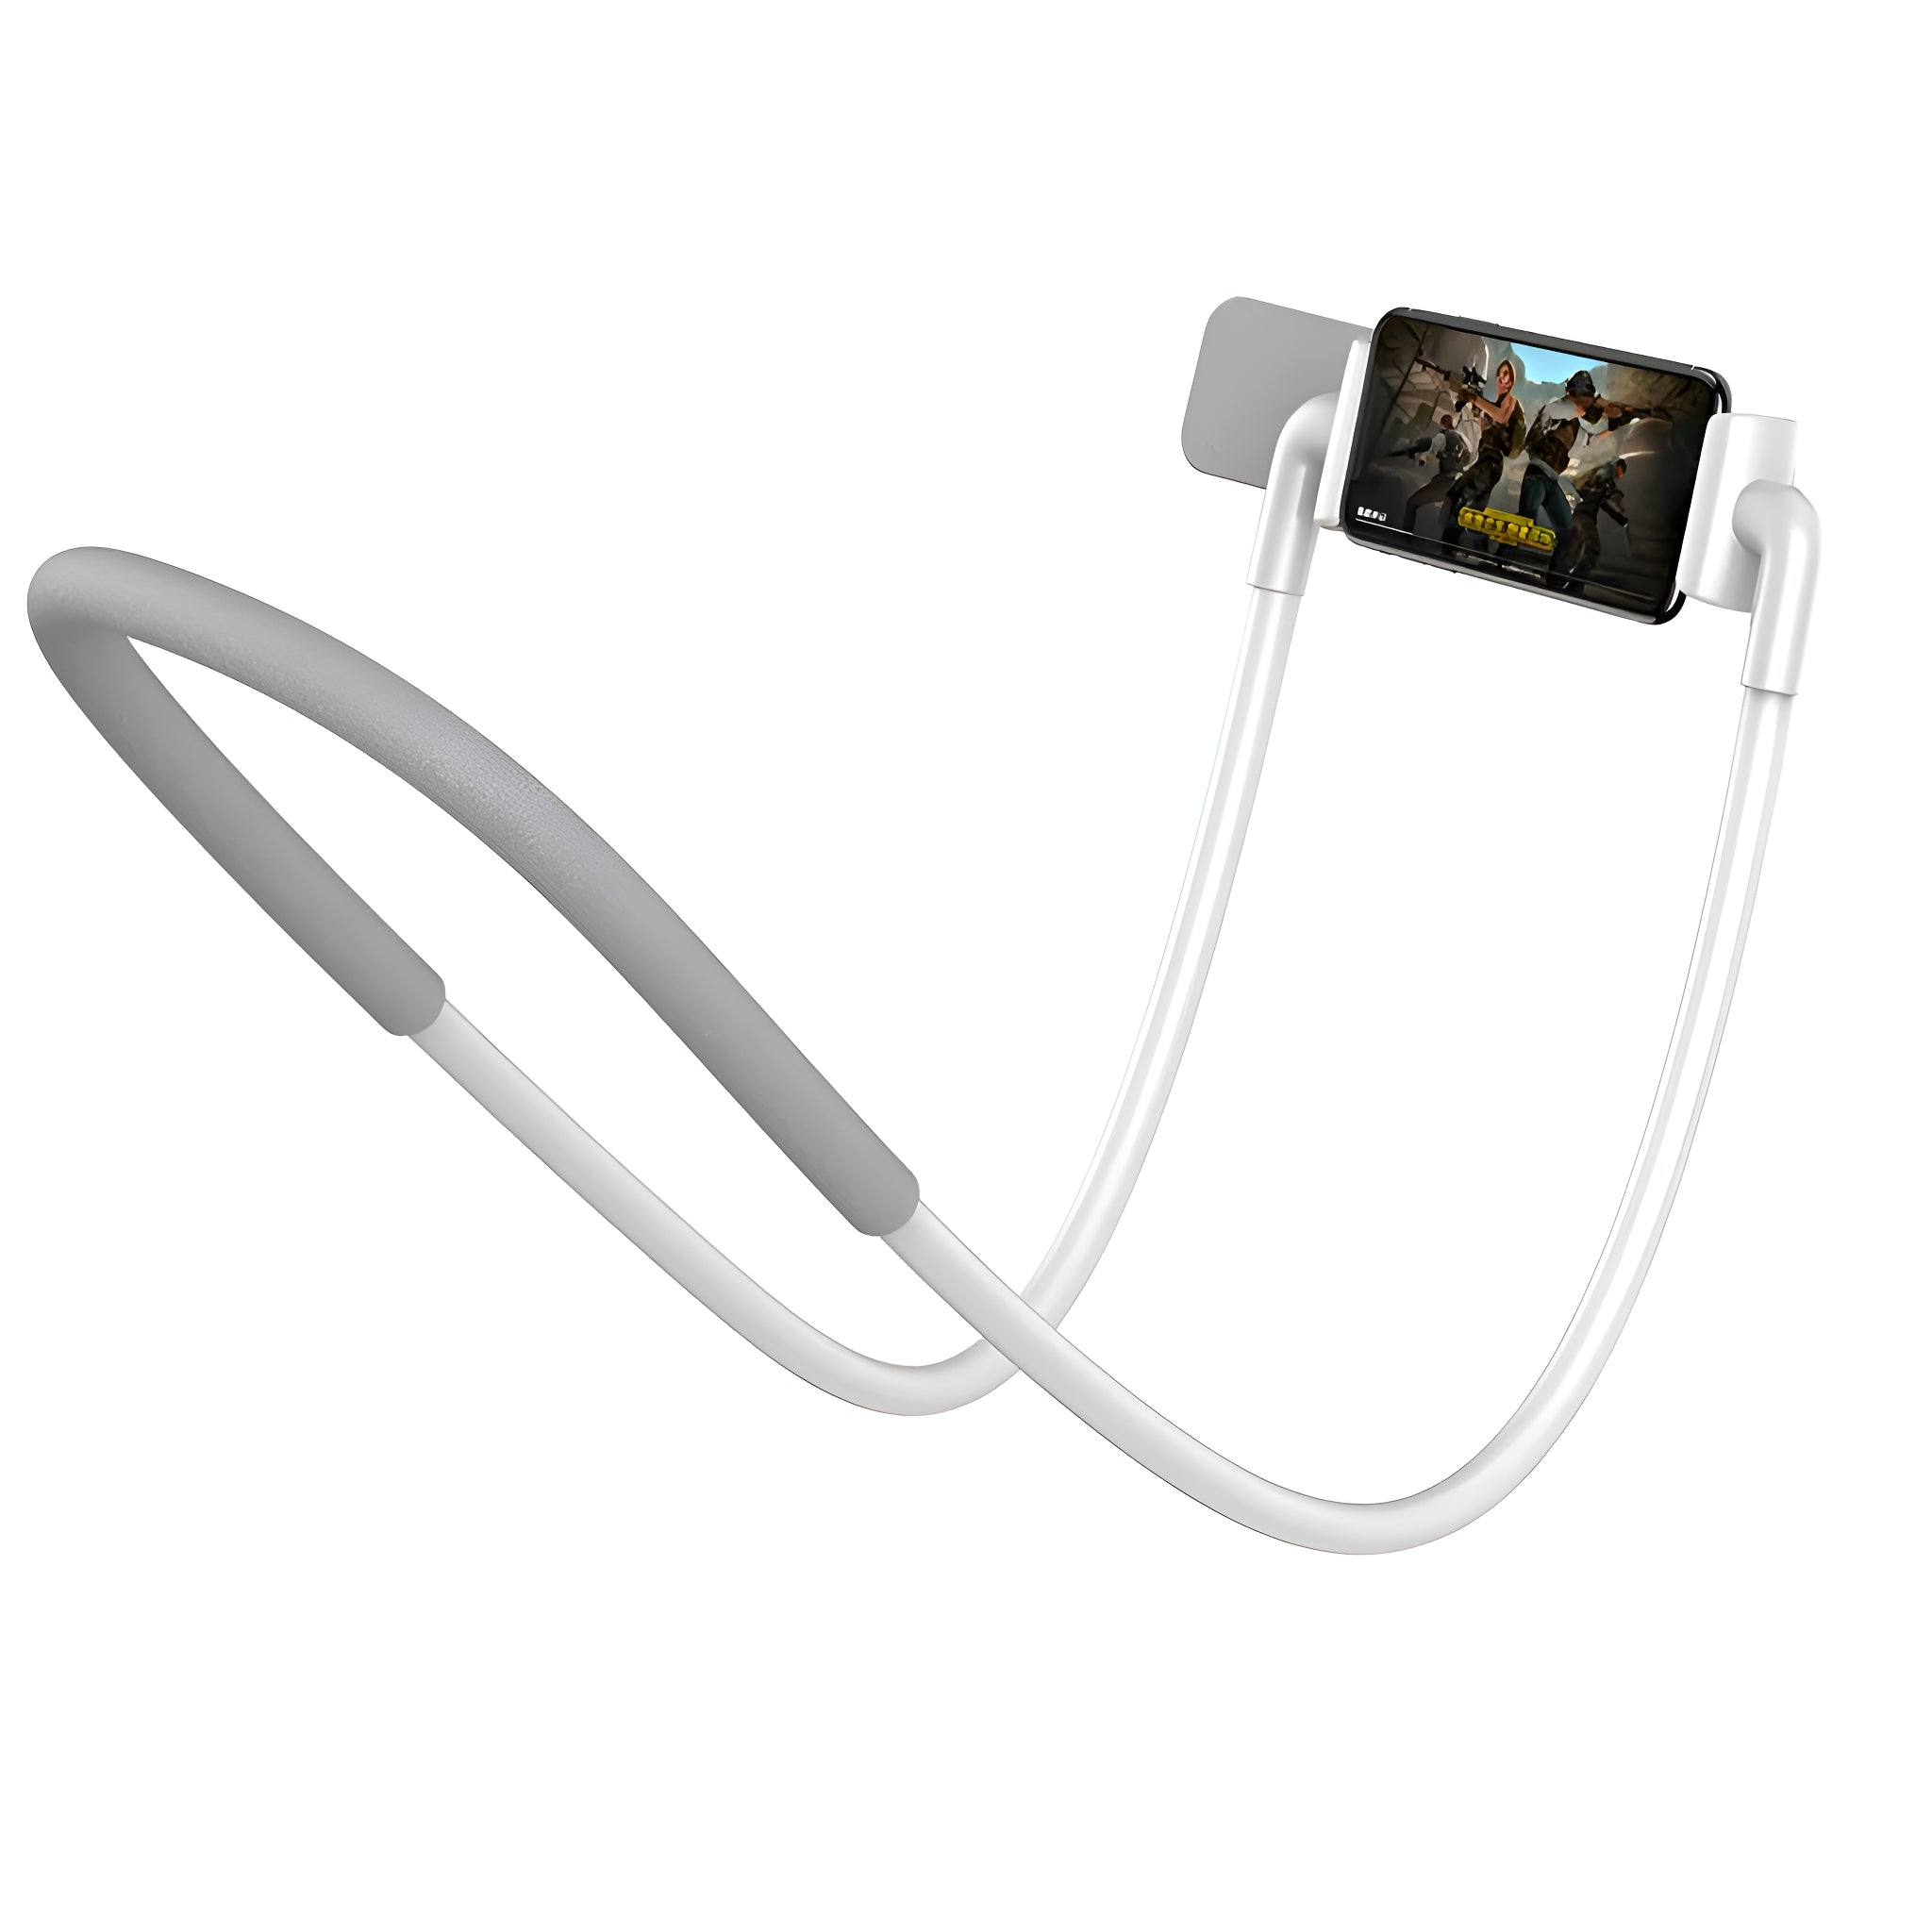 Baseus Aluminium Lazy Neck Phone Holder Hanging Mobile Tablet Support For Video Movie Watching